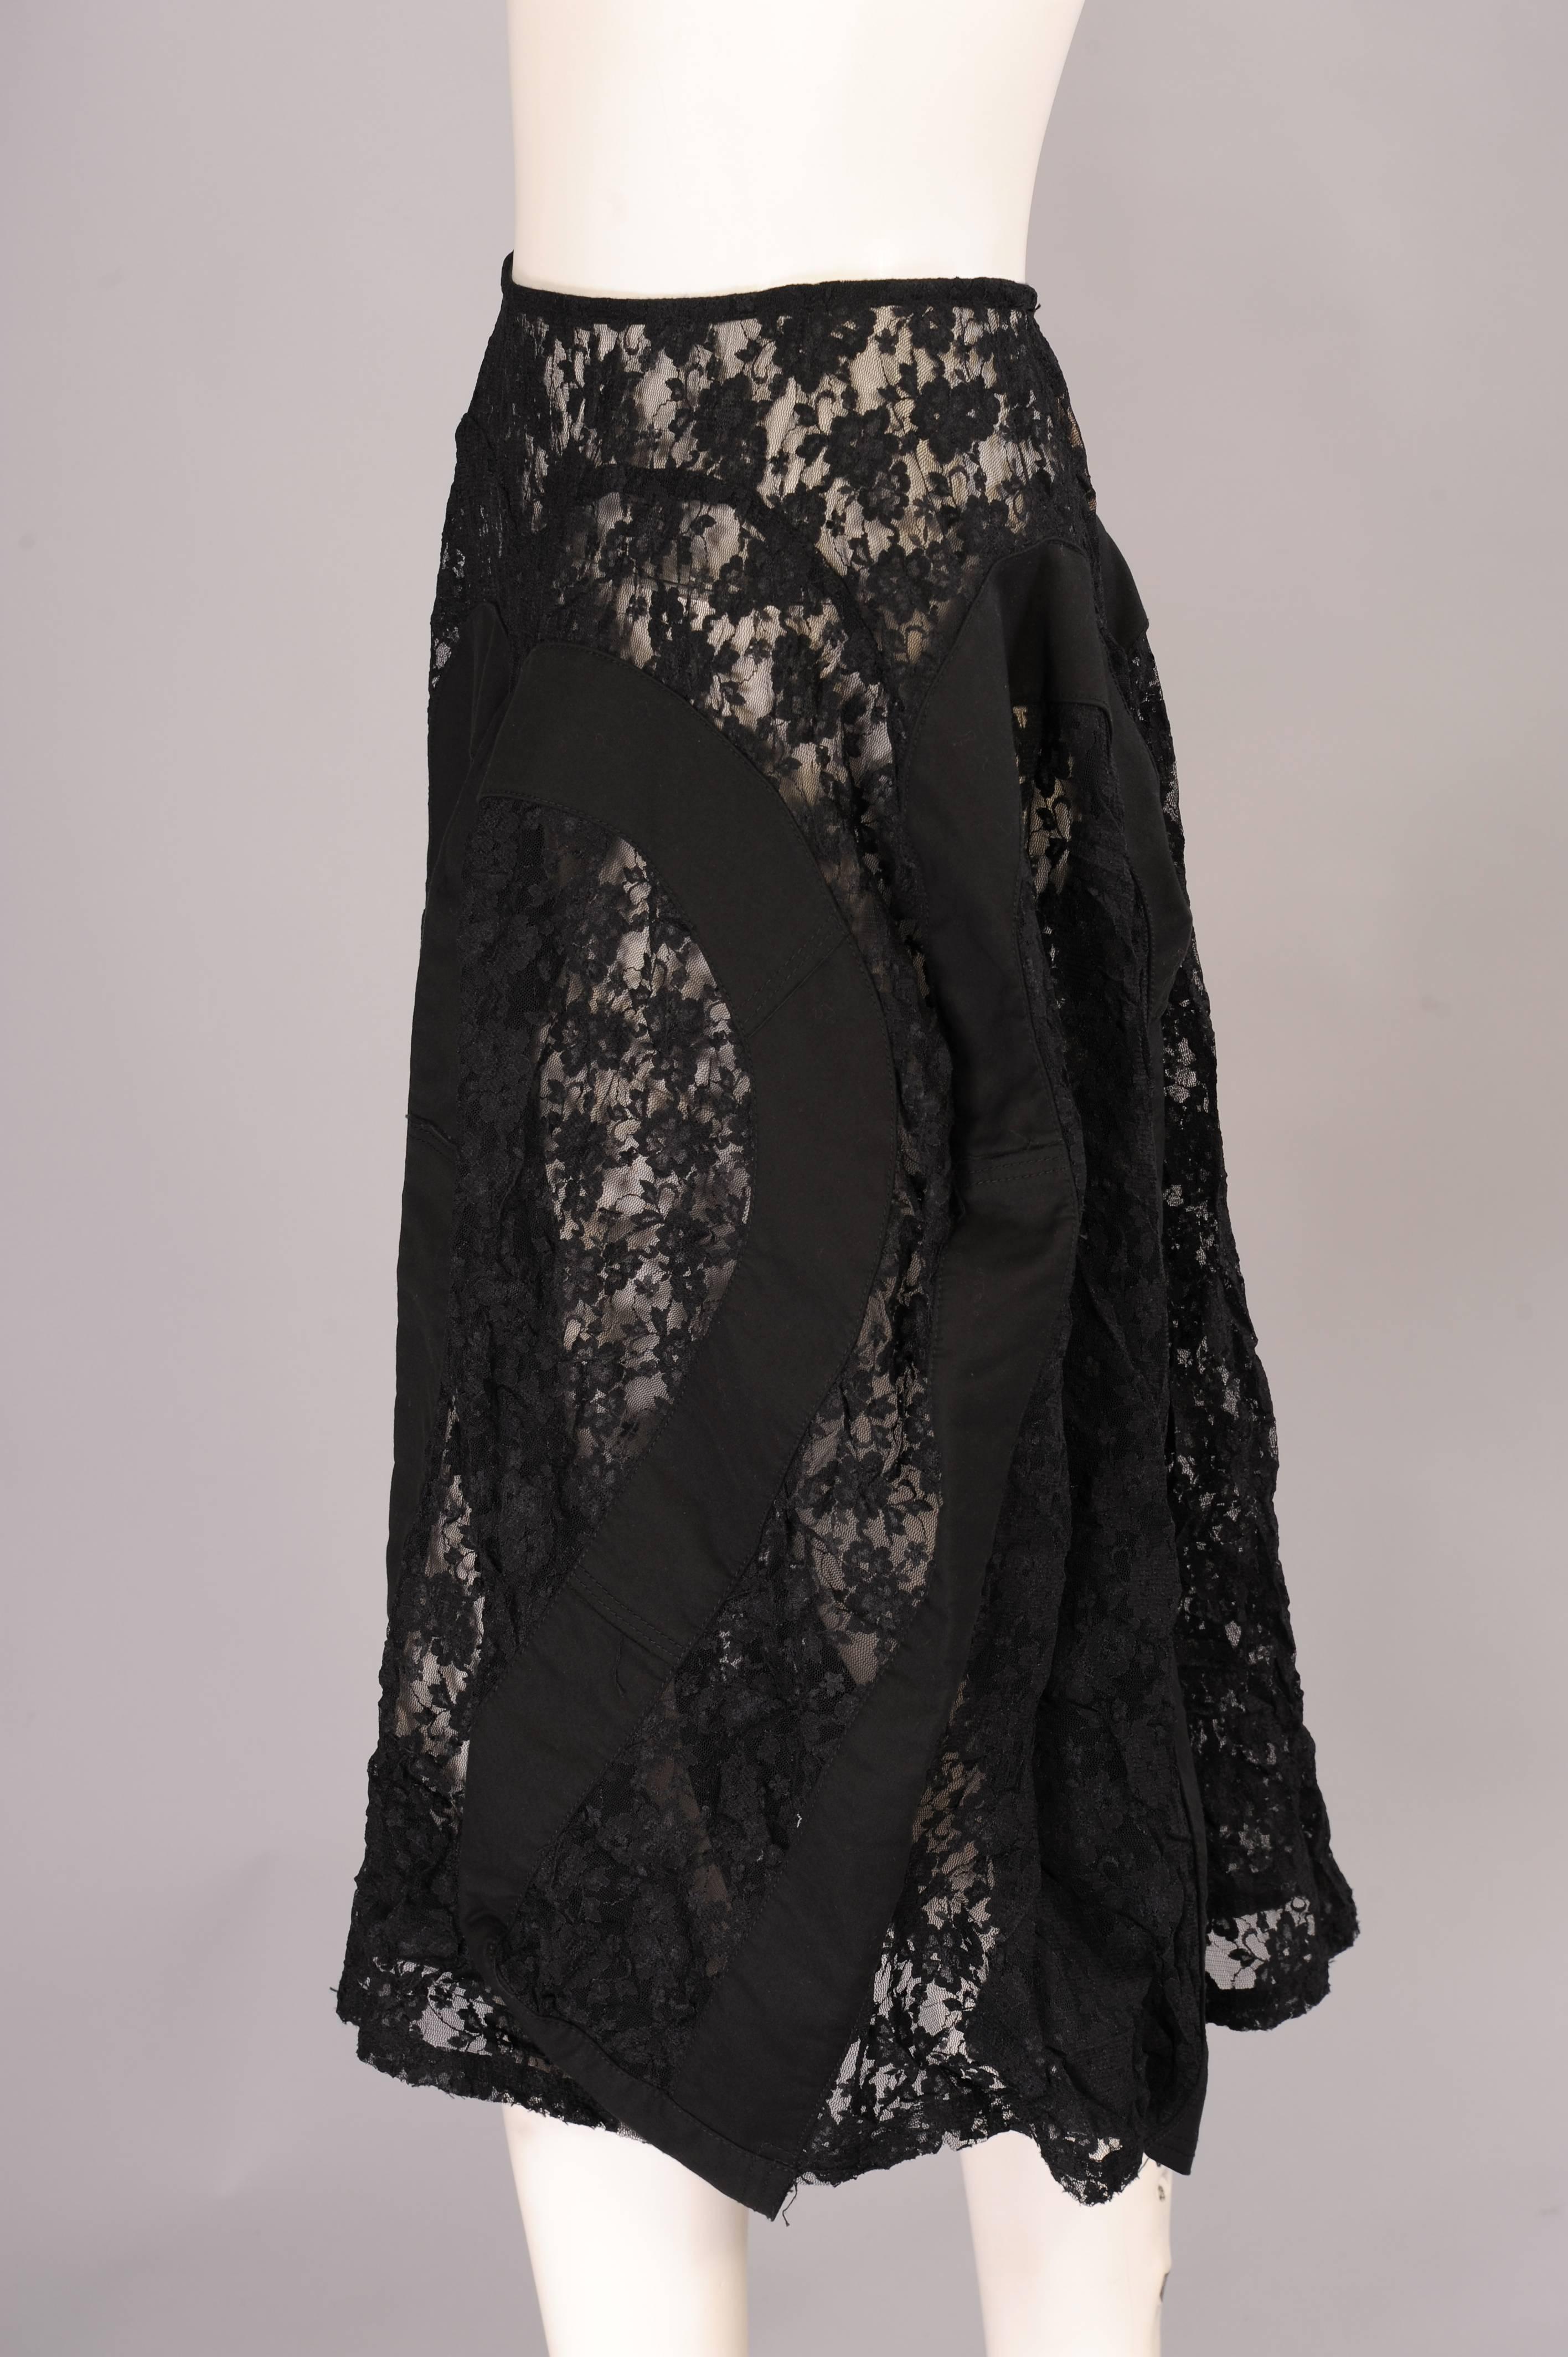 Black floral lace is combined with wide bands of black cotton creating unusual shapes and angles in this skirt designed by Junta Watanabe. It is in excellent condition and appears unworn.
Measurements;
Waist 2"
Length 30"